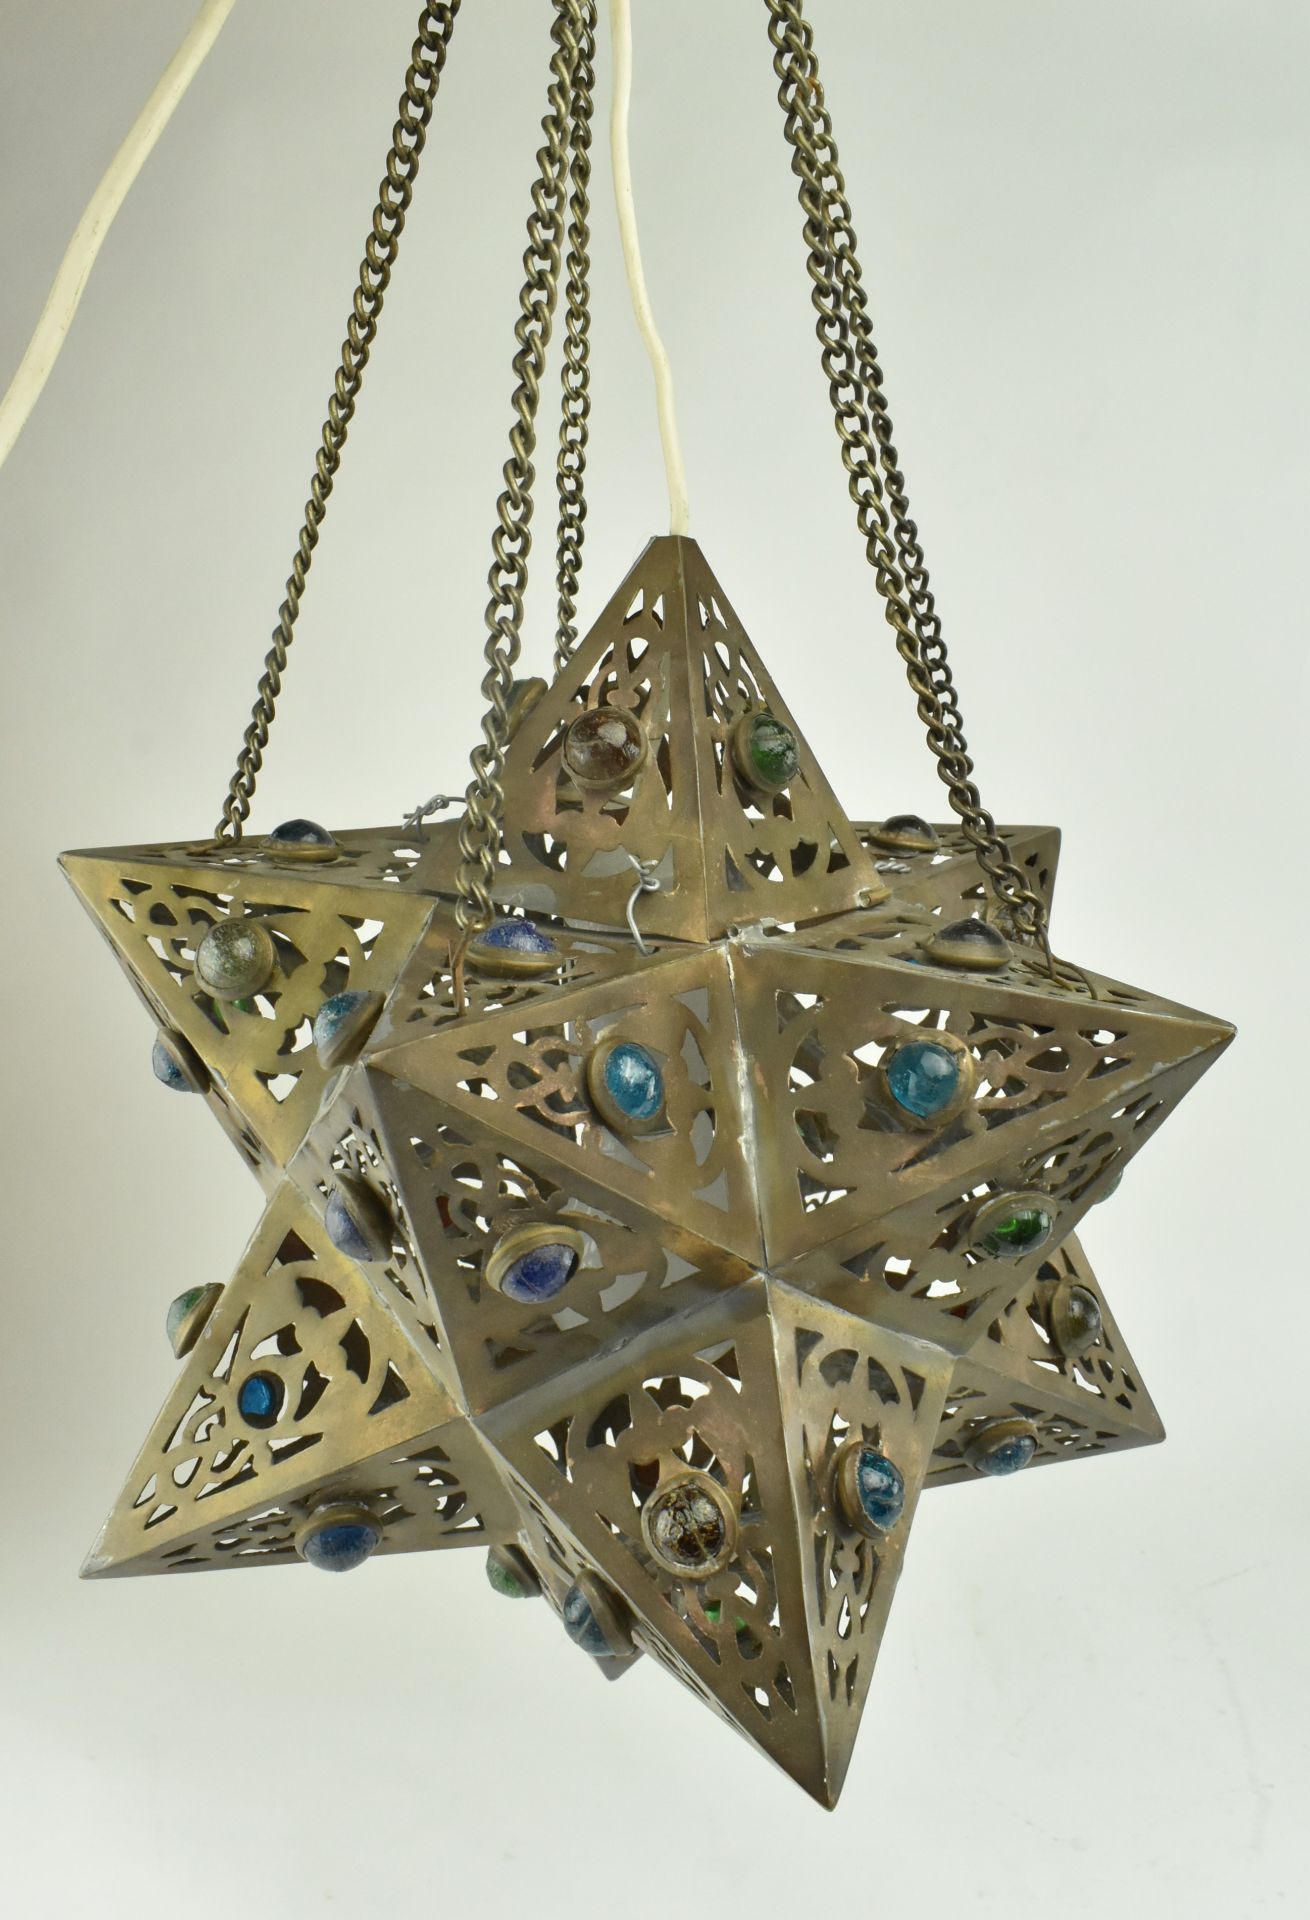 TWO VINTAGE STAR SHAPED MOROCCAN / INDIAN HANGING LIGHTS - Image 2 of 6